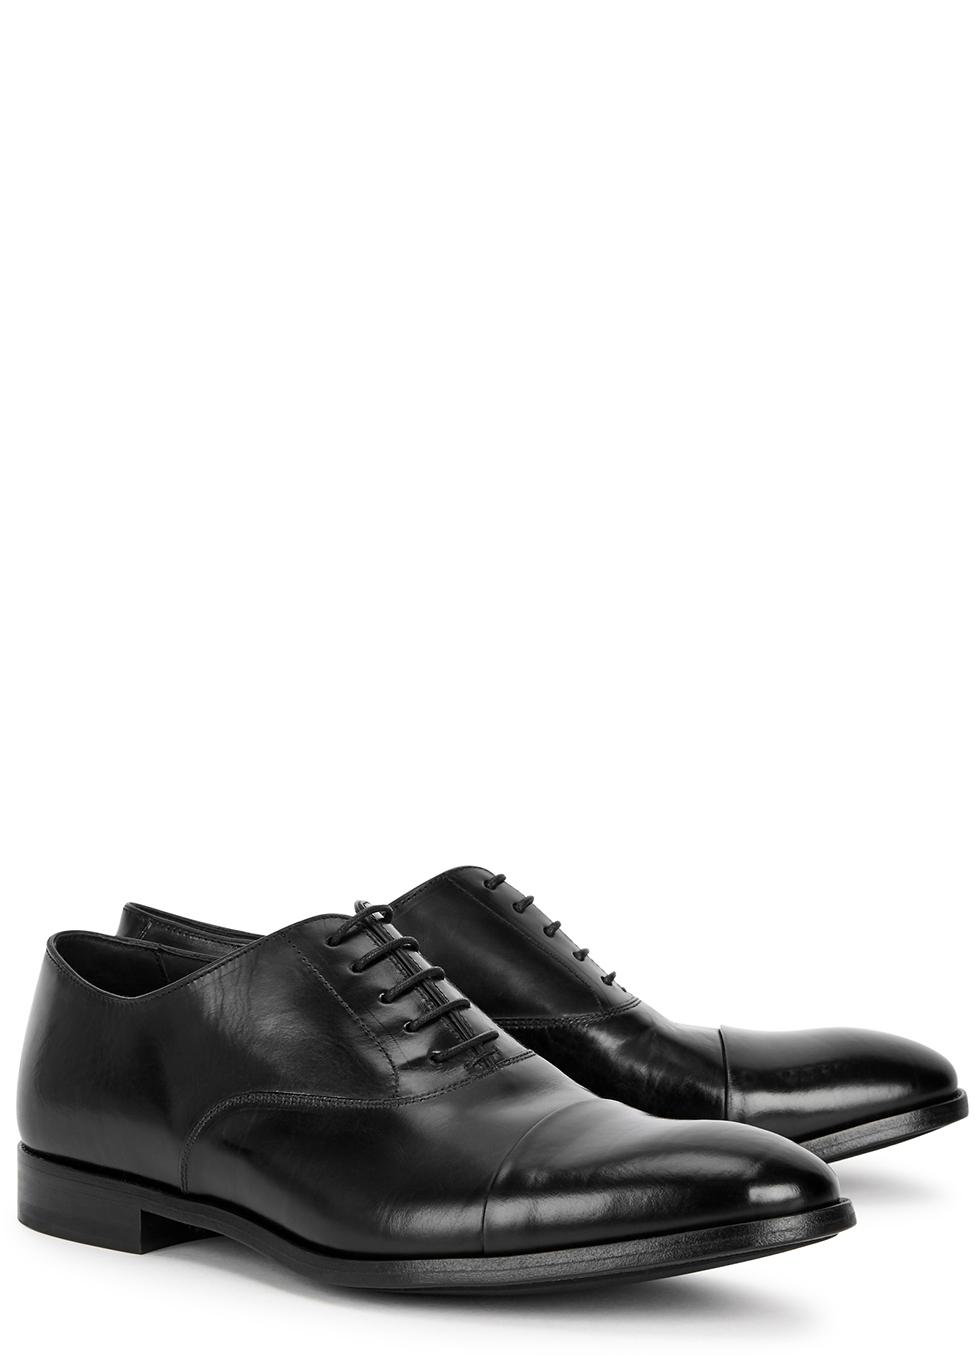 Paul Smith Brent Leather Oxford Shoes in Black for Men | Lyst